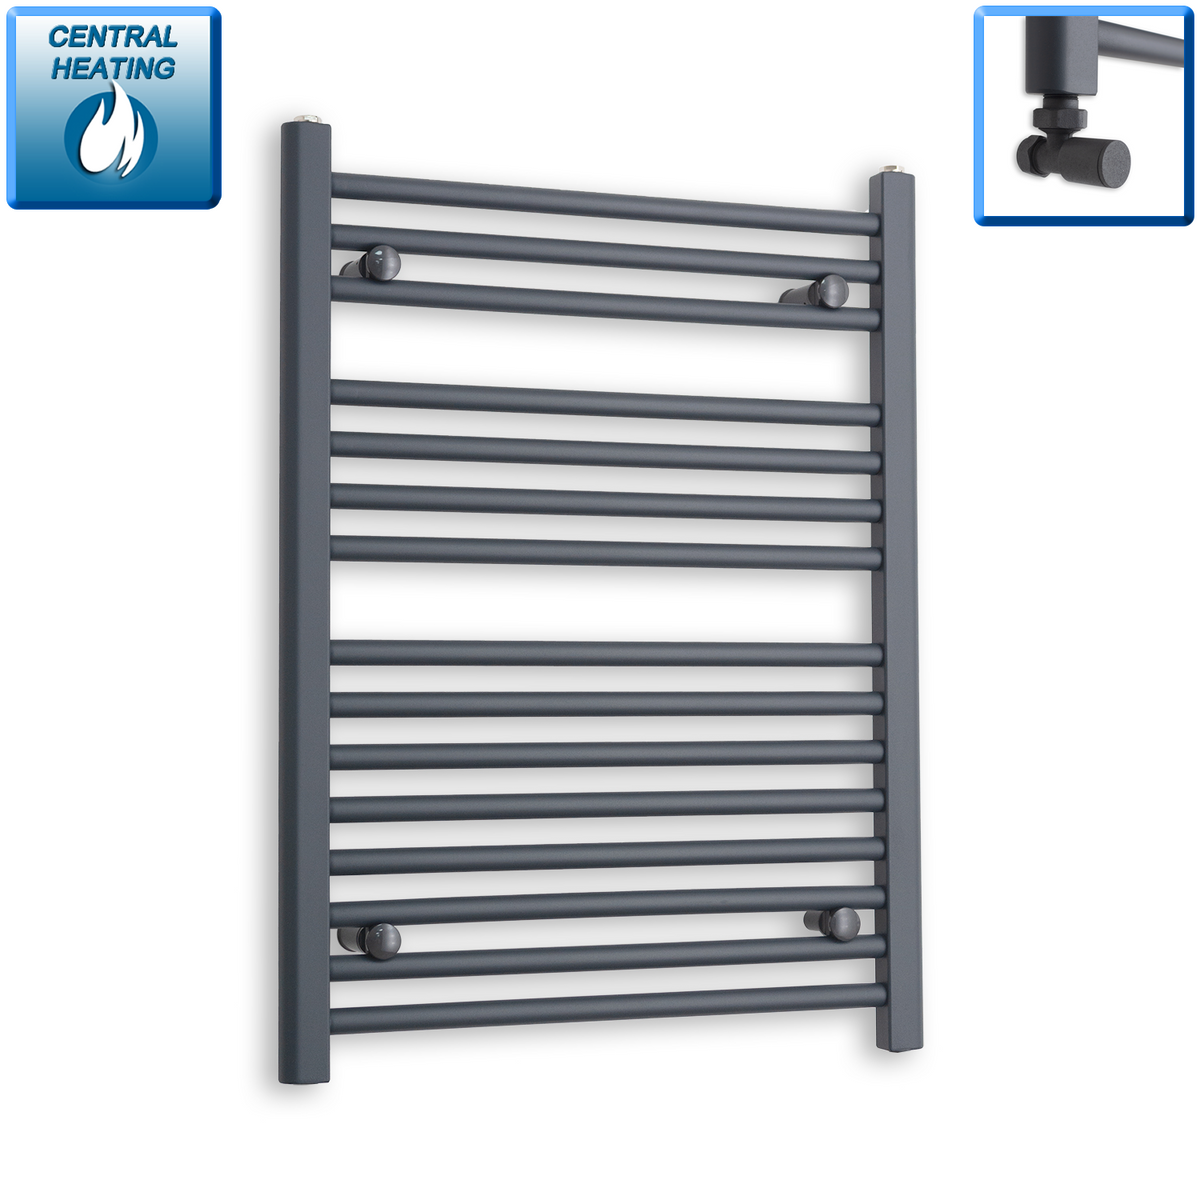 800 x 600 Heated Straight Anthracite-Sand Grey Towel Radiator central heating